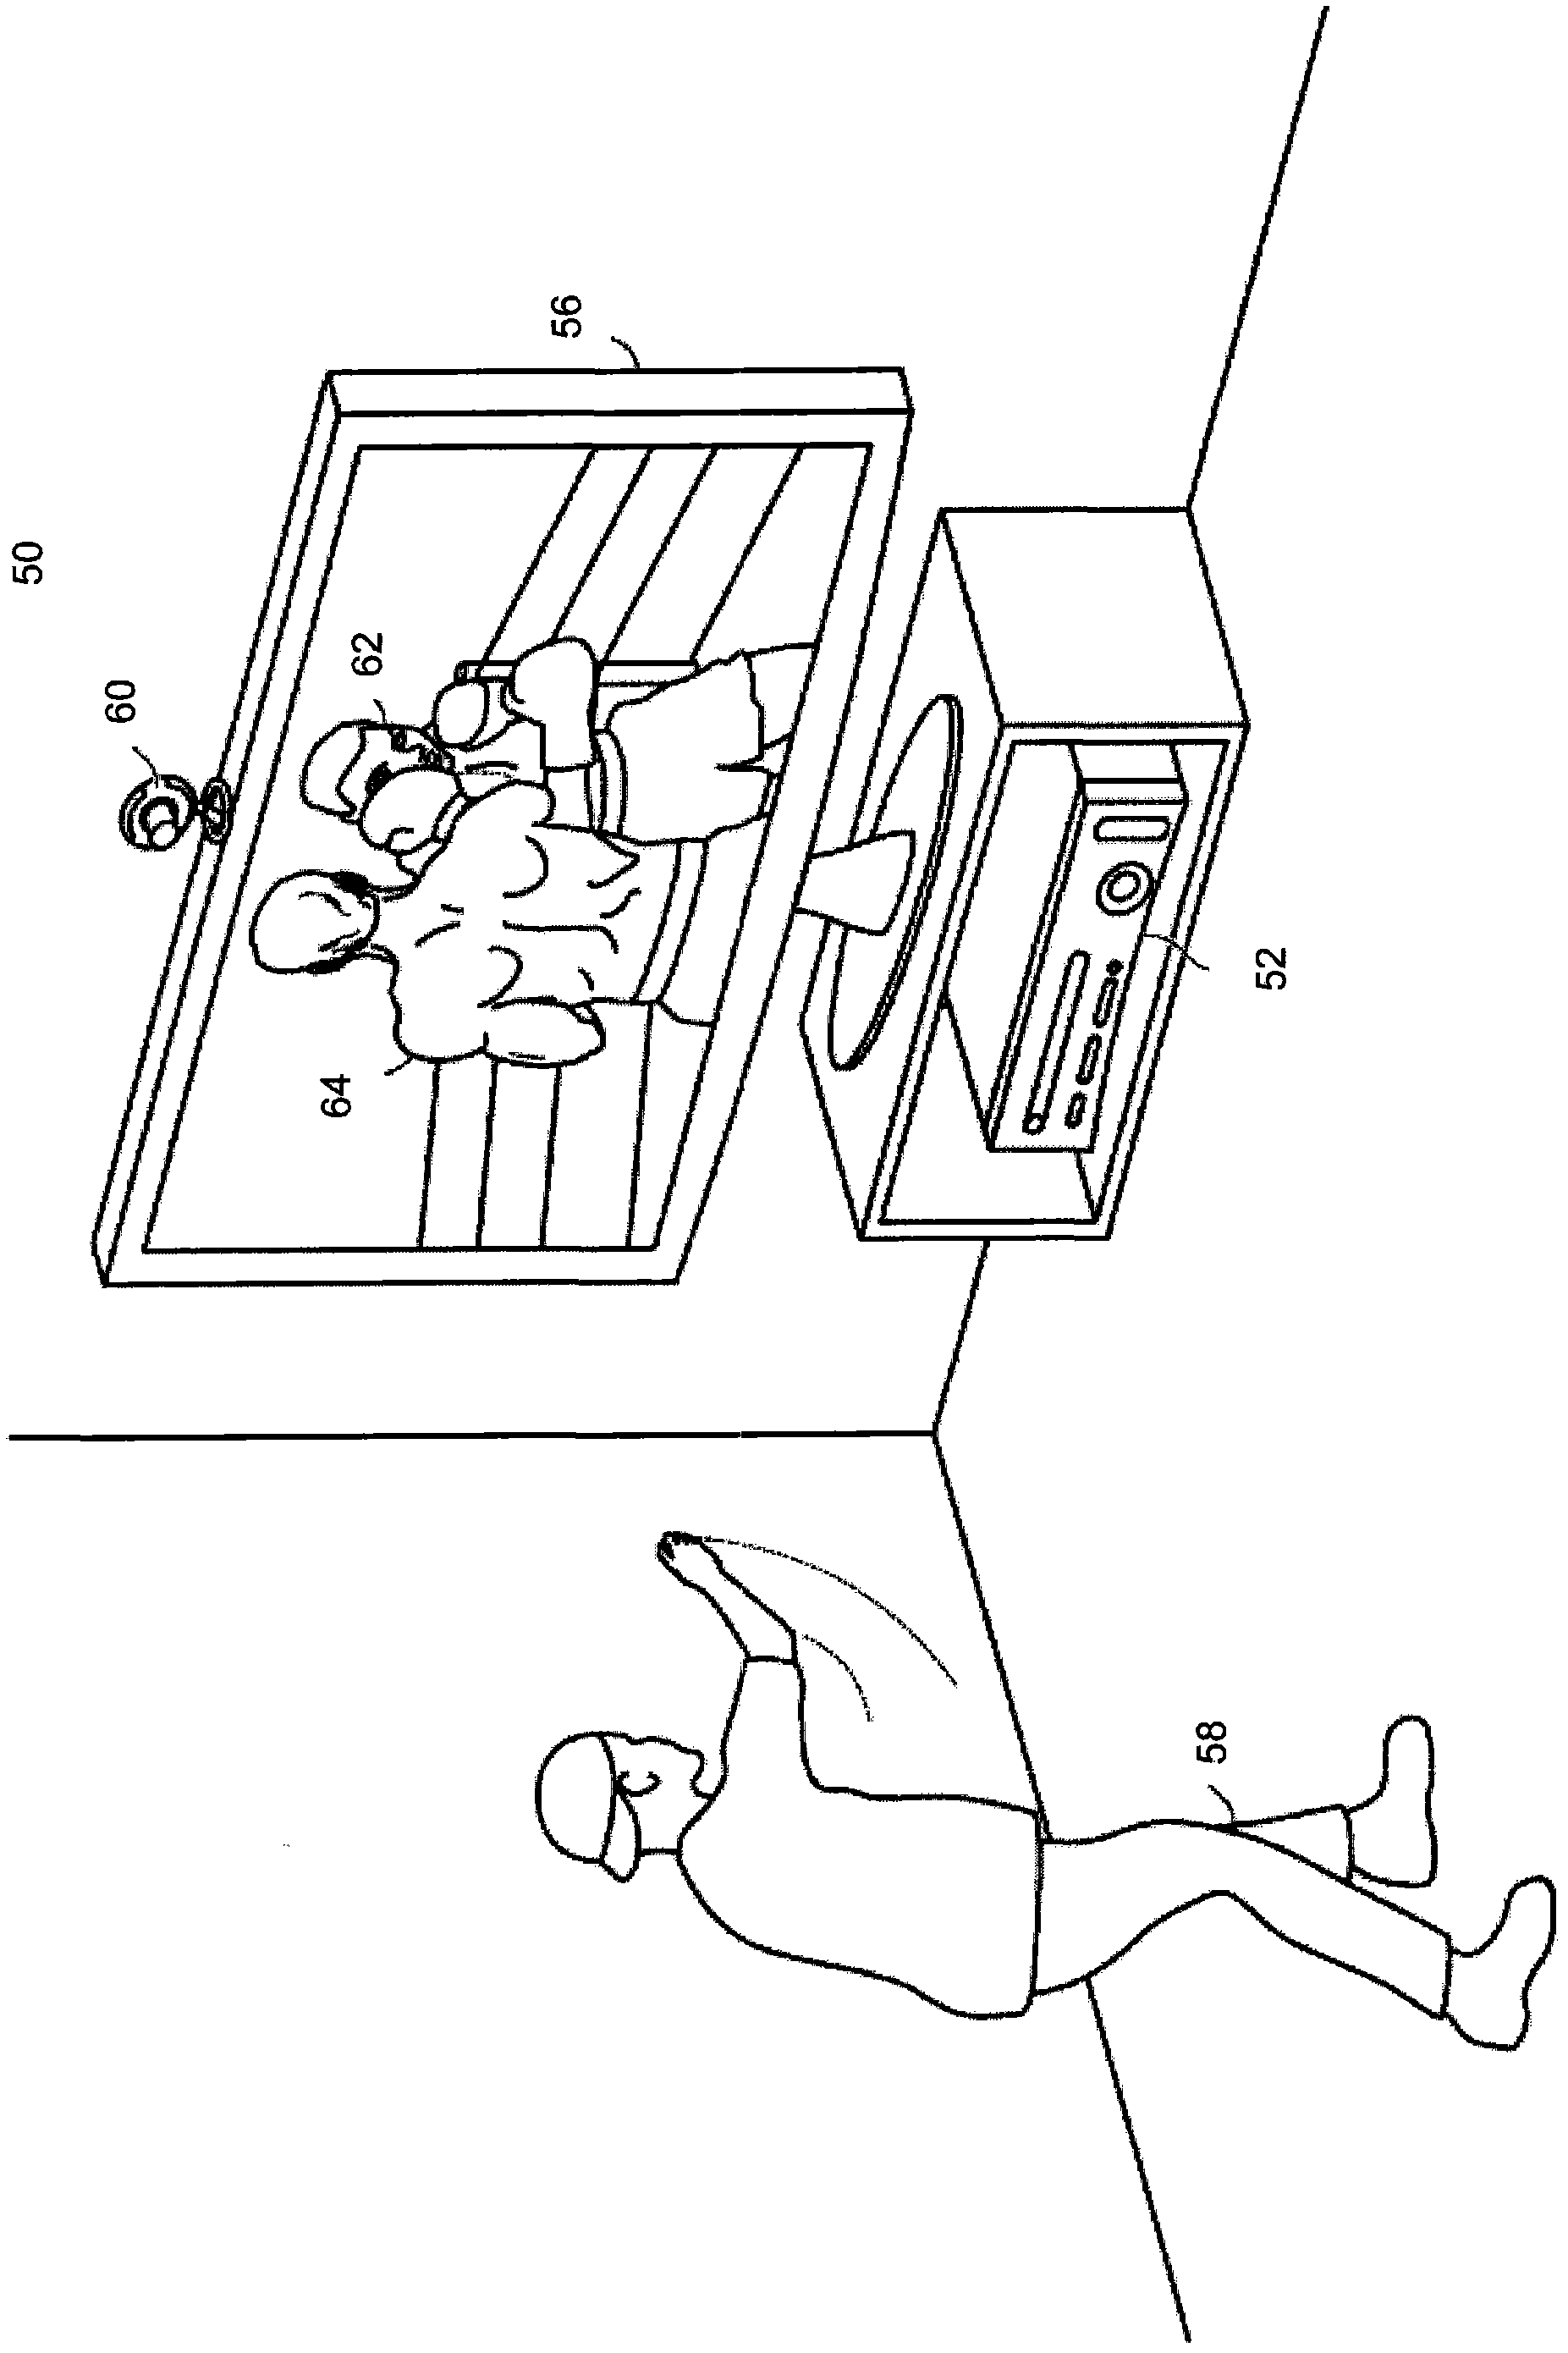 Depth projector system with integrated vcsel array